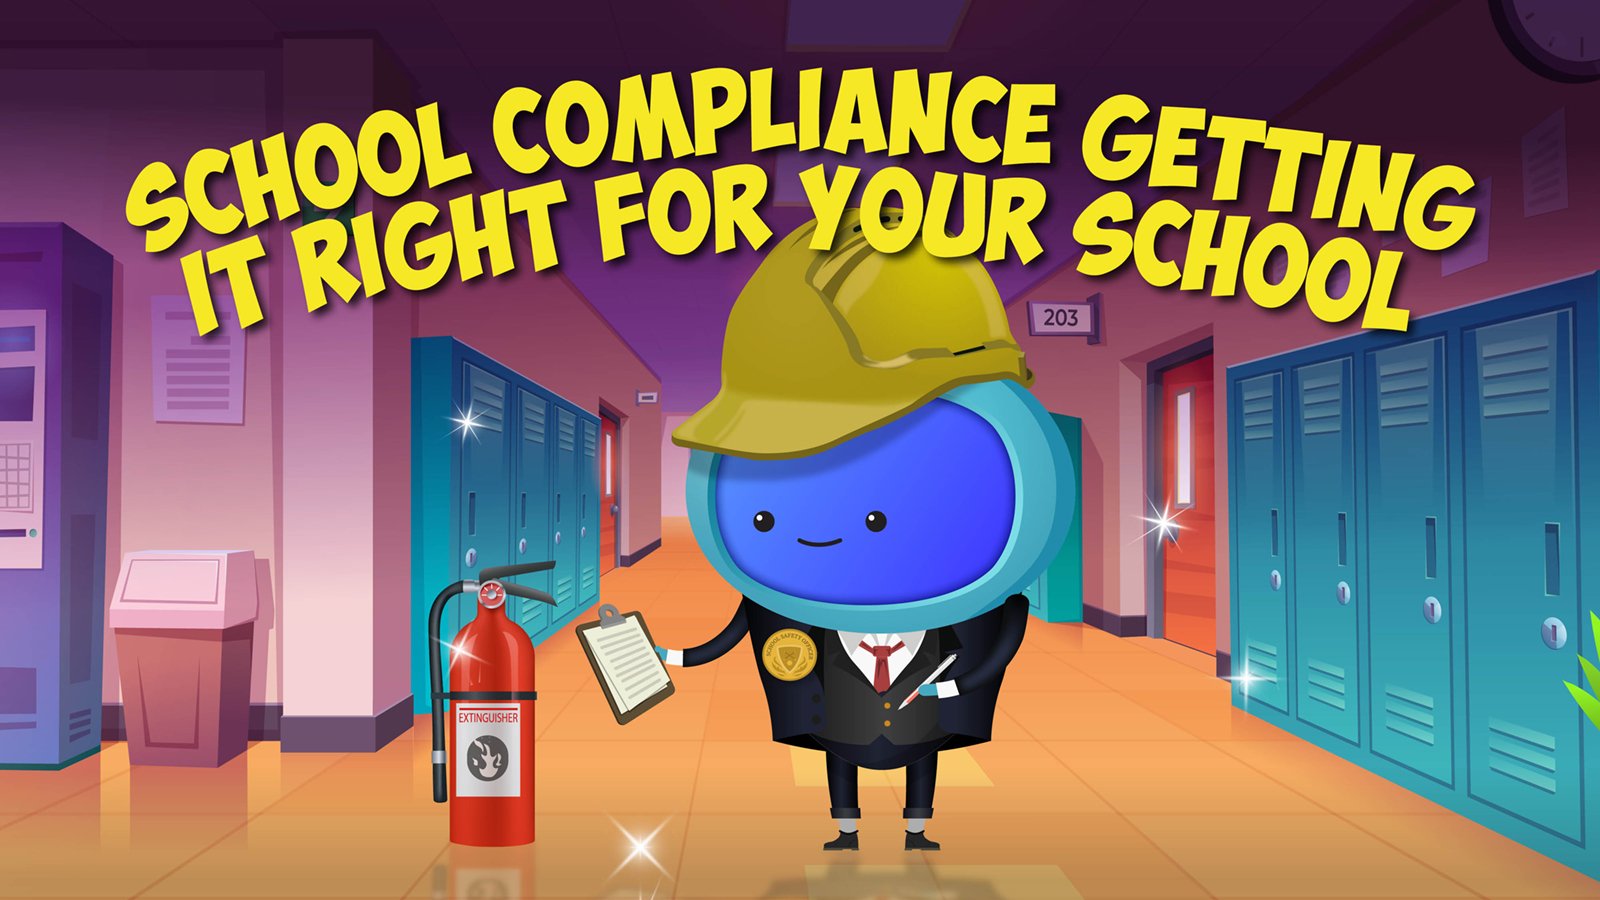 Blog School Compliance - Getting it Right for Your School 1600x900-1